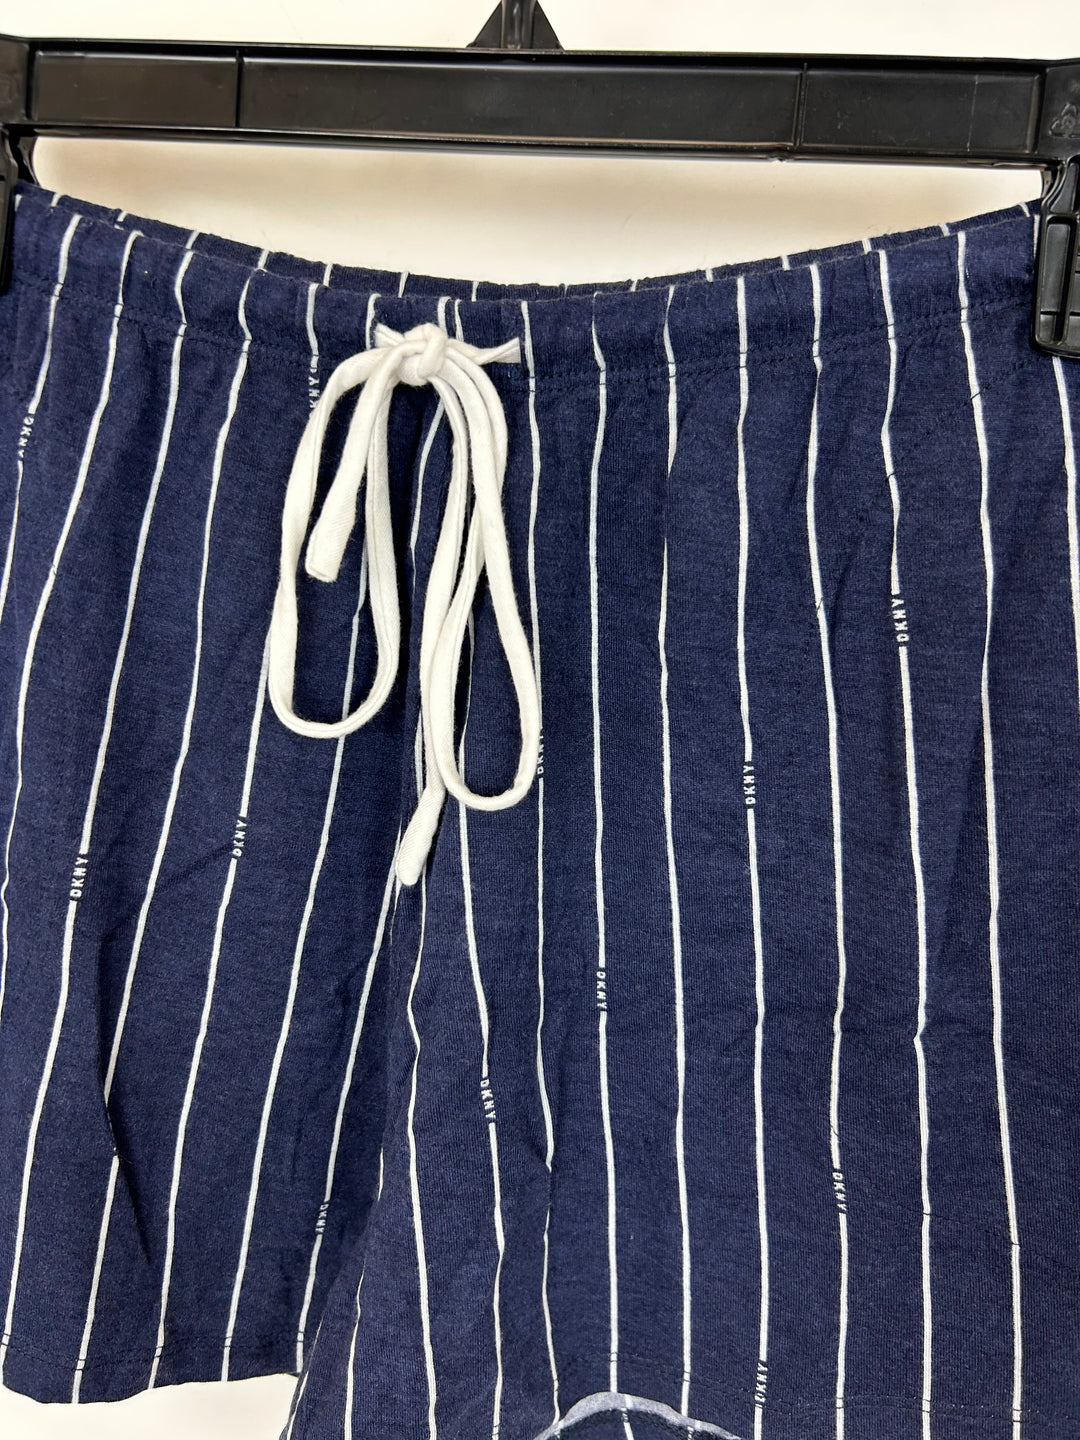 Navy Blue and White Striped Loungewear Shorts - Small